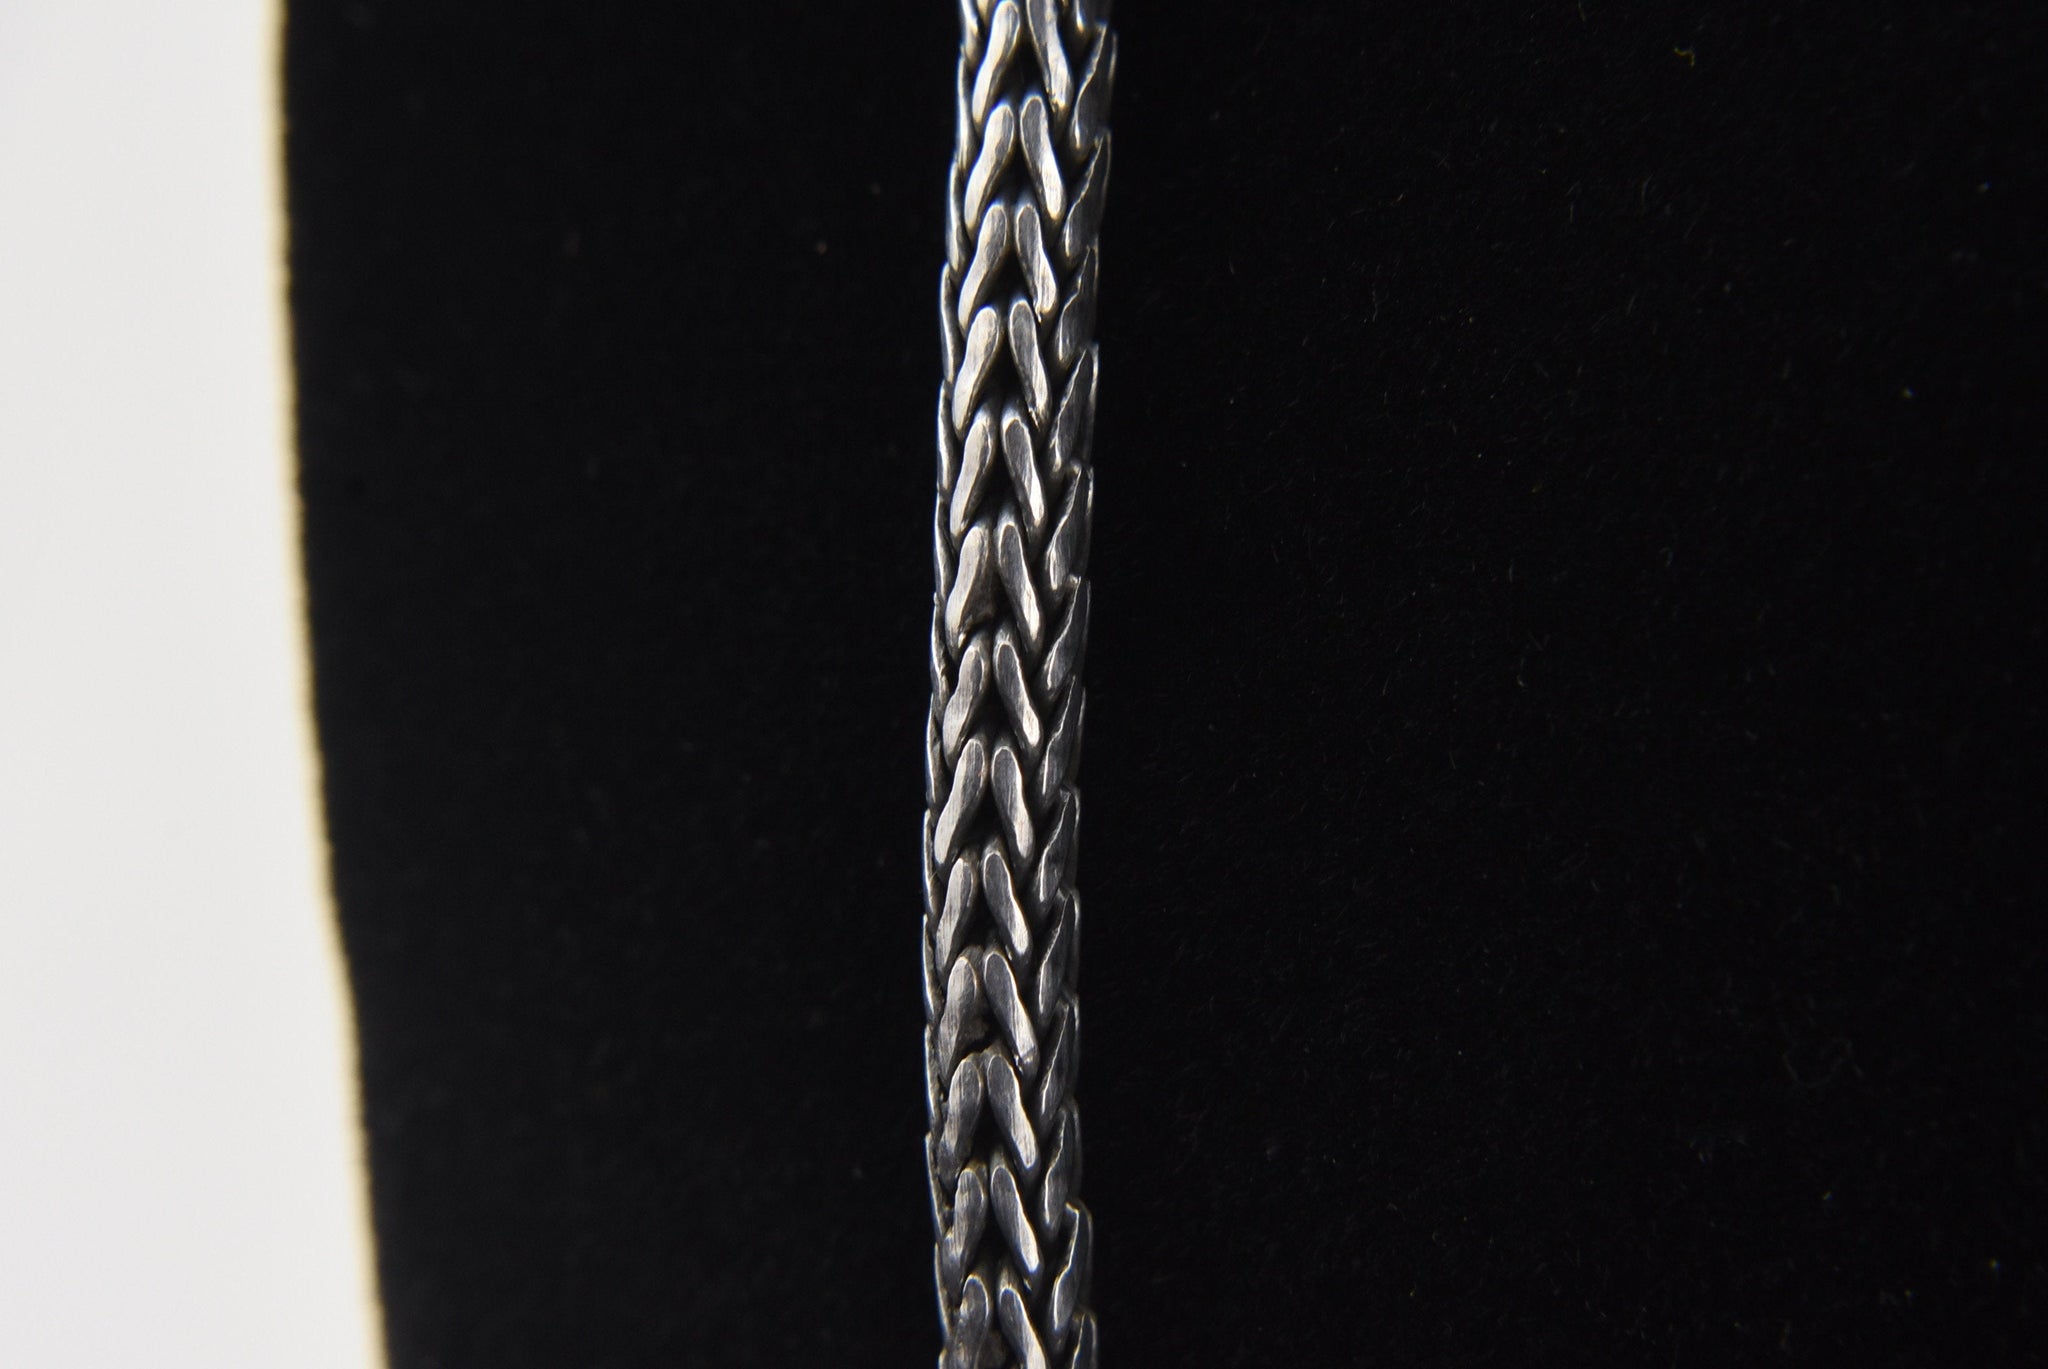 Sterling Silver Foxtail Chain Link Necklace with S Hook Clasp - 27"